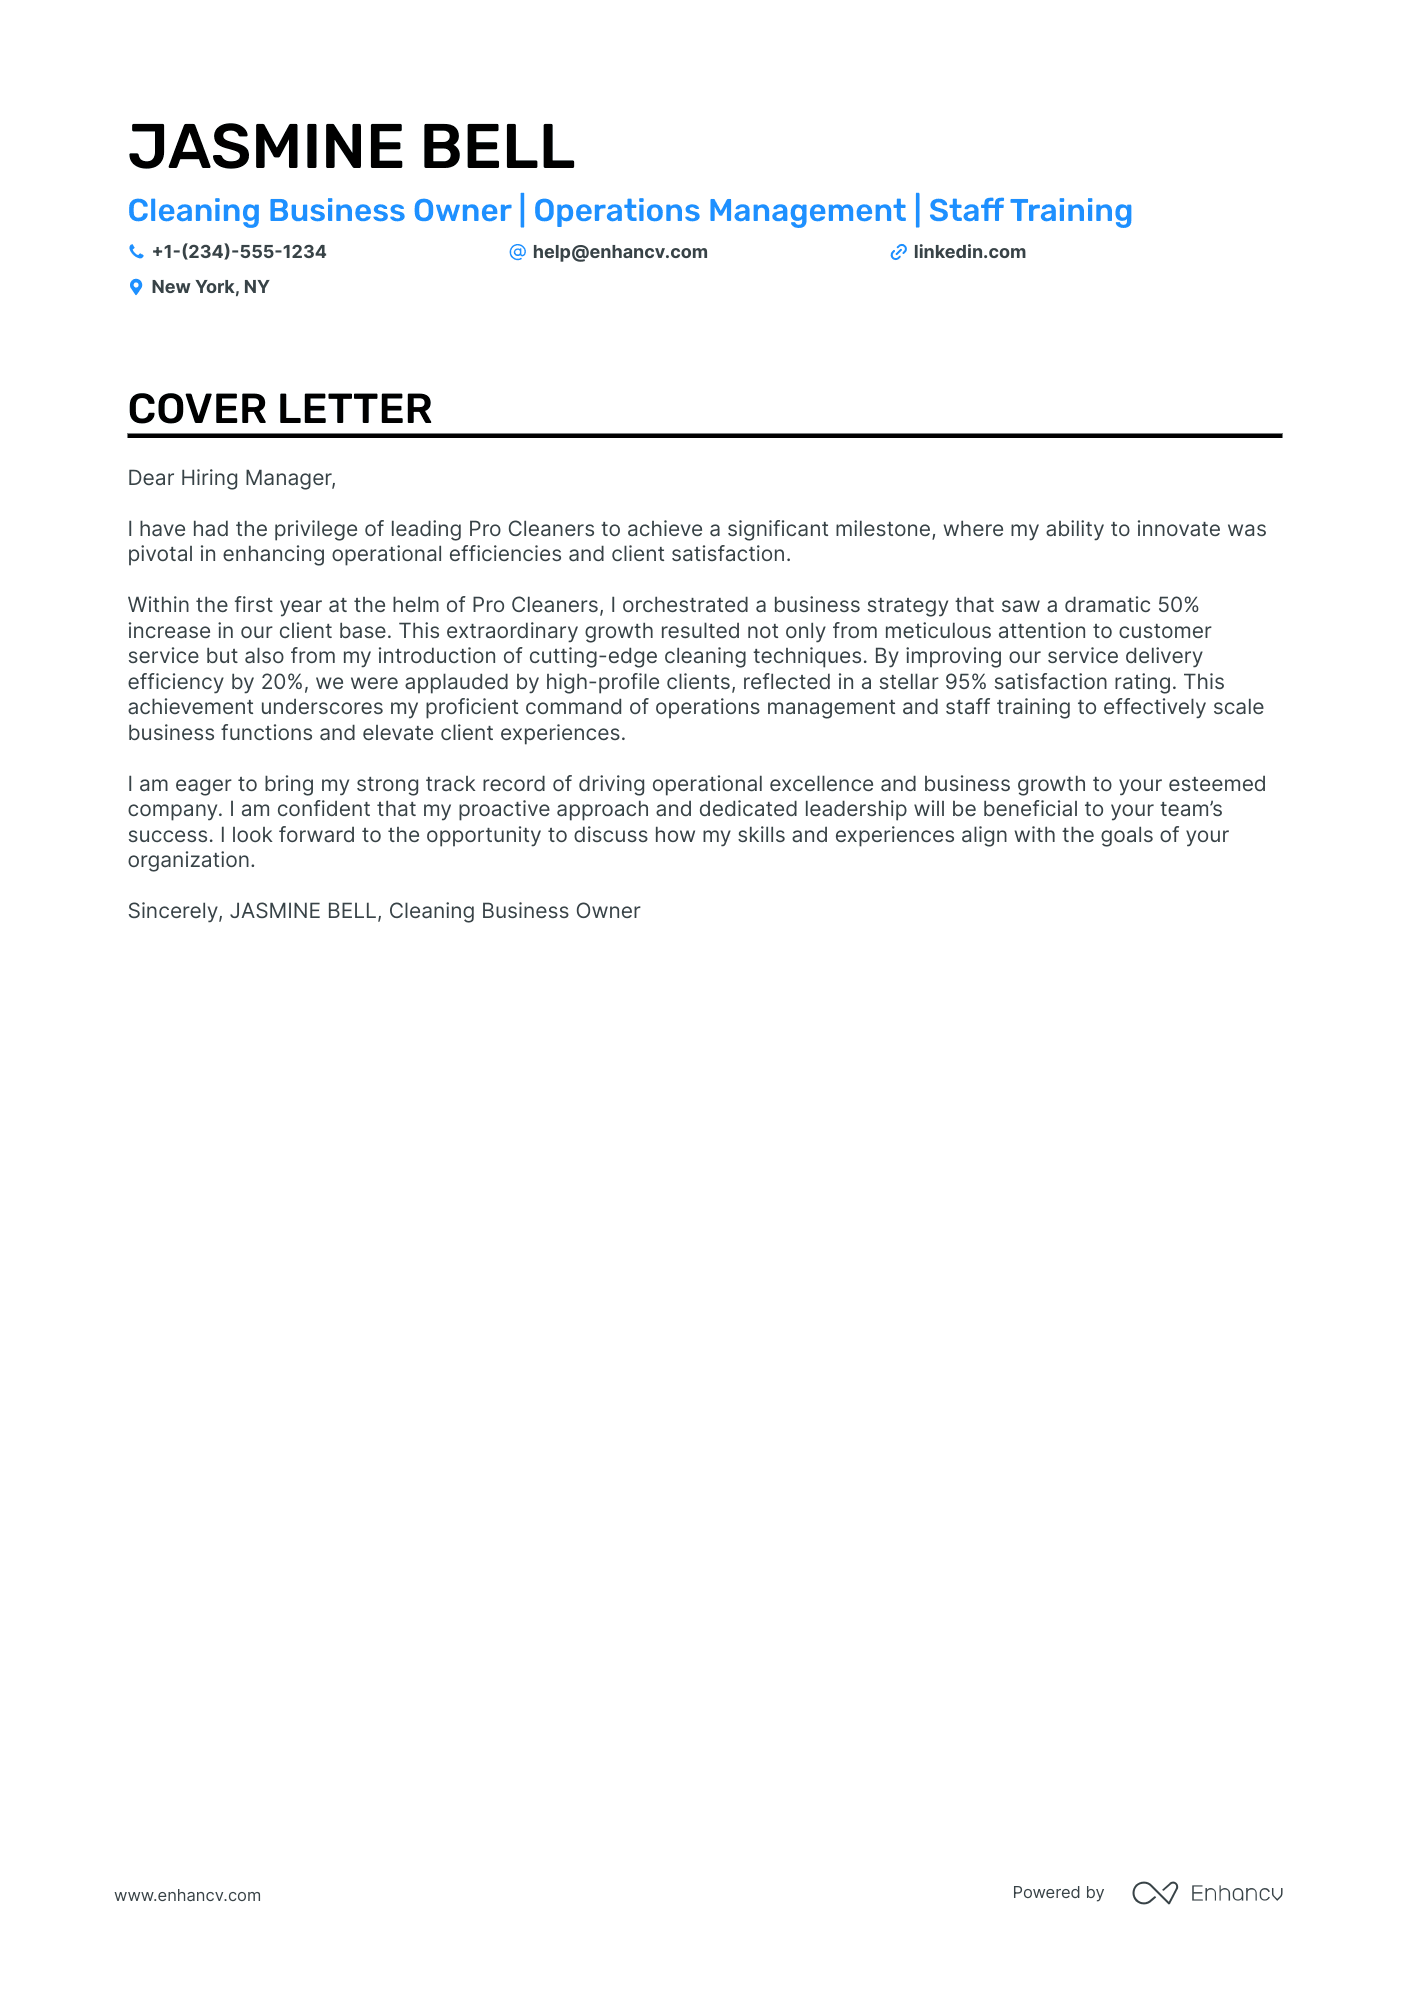 Cleaning Business Owner cover letter